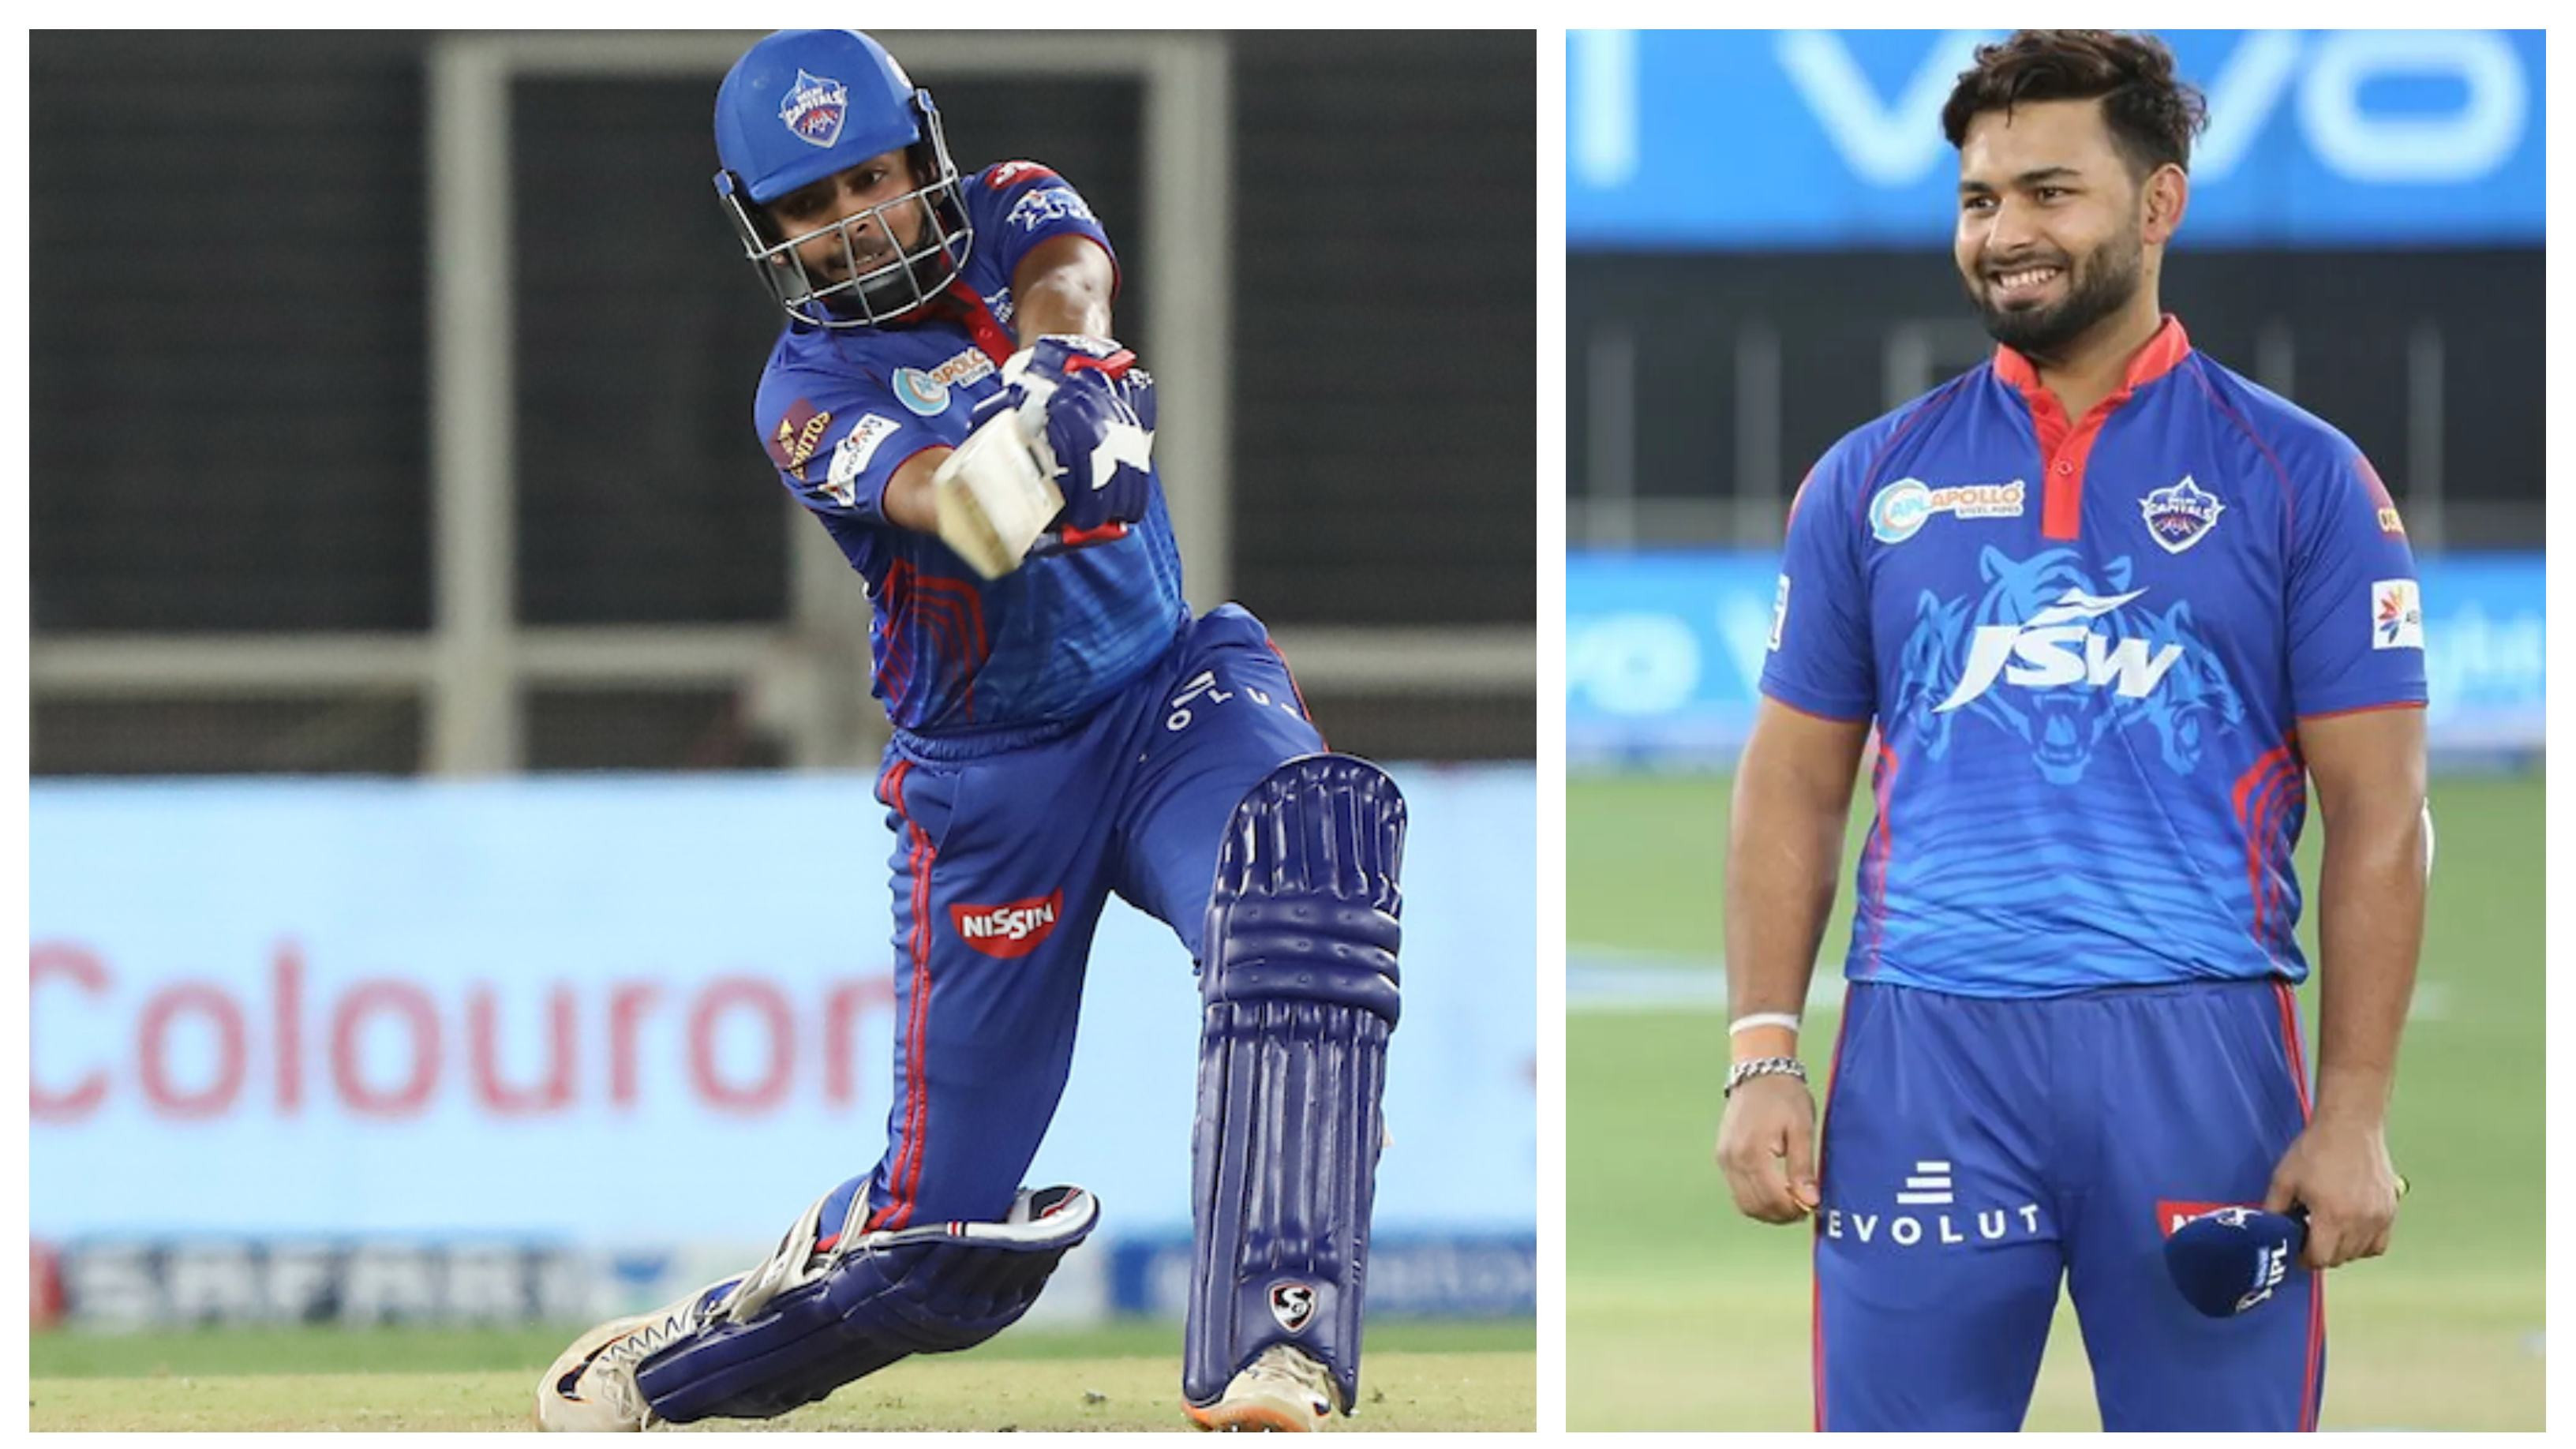 IPL 2021: “If you give him the confidence, he can do wonders”, Rishabh Pant hails Prithvi Shaw